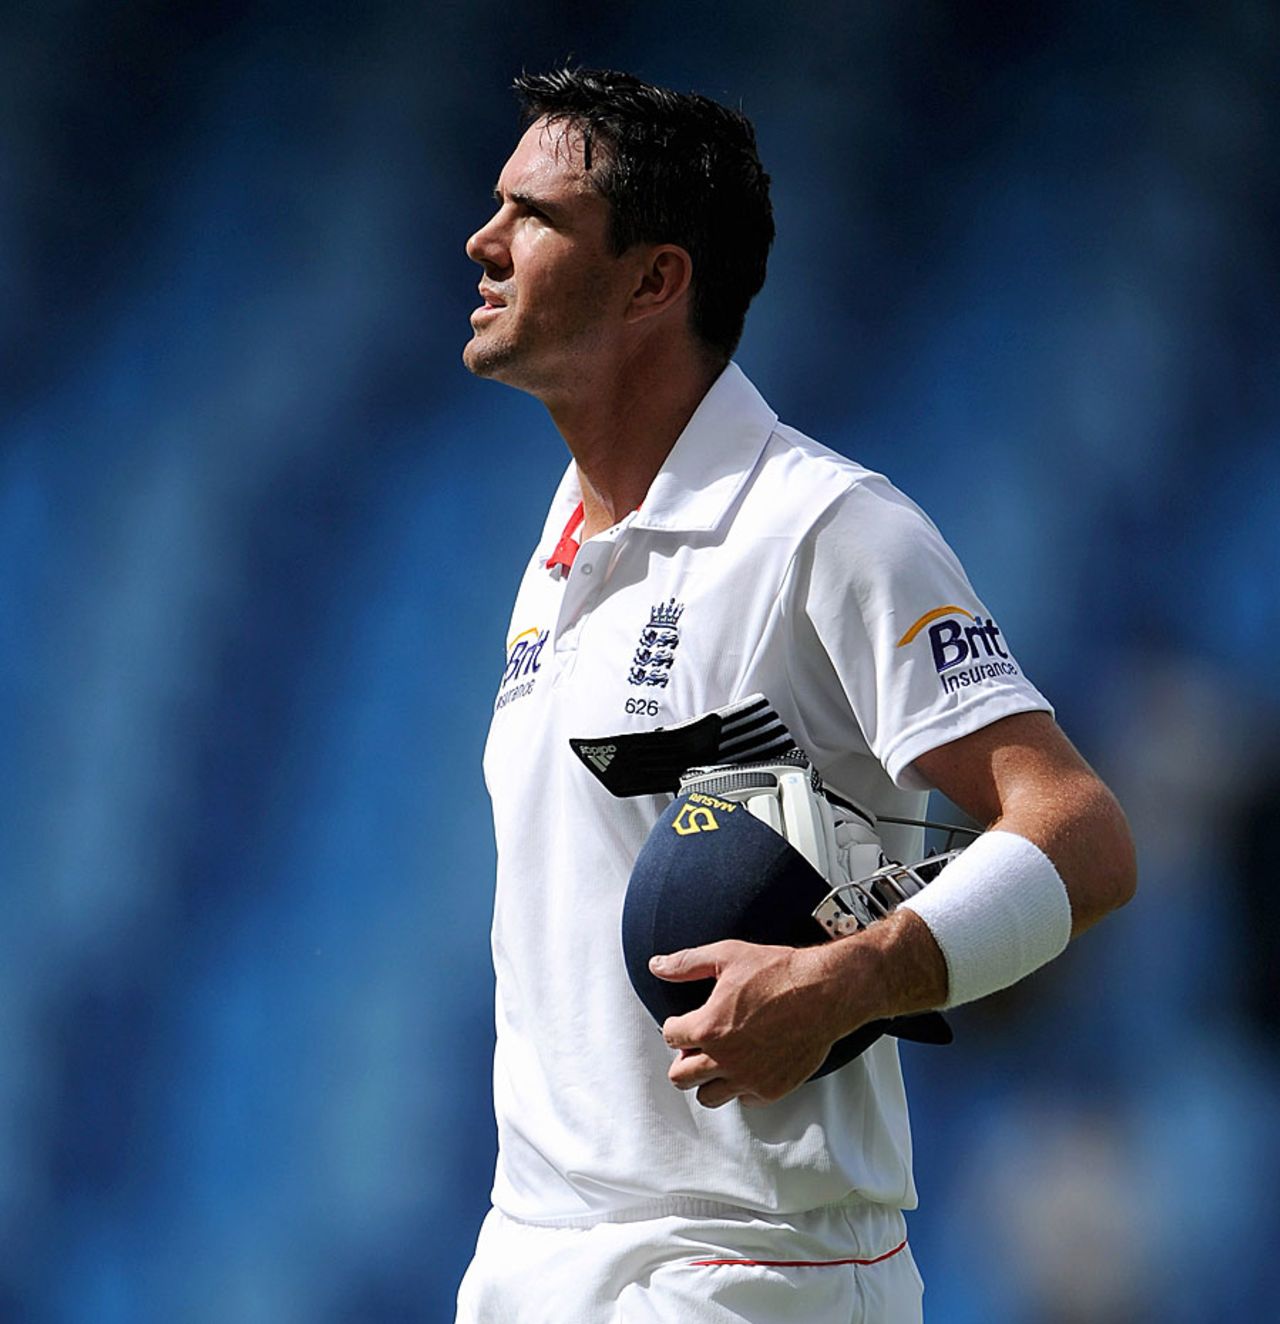 Kevin Pietersen walks back after another failure, Pakistan v England, 3rd Test, Dubai, 4th day, February 6, 2012 